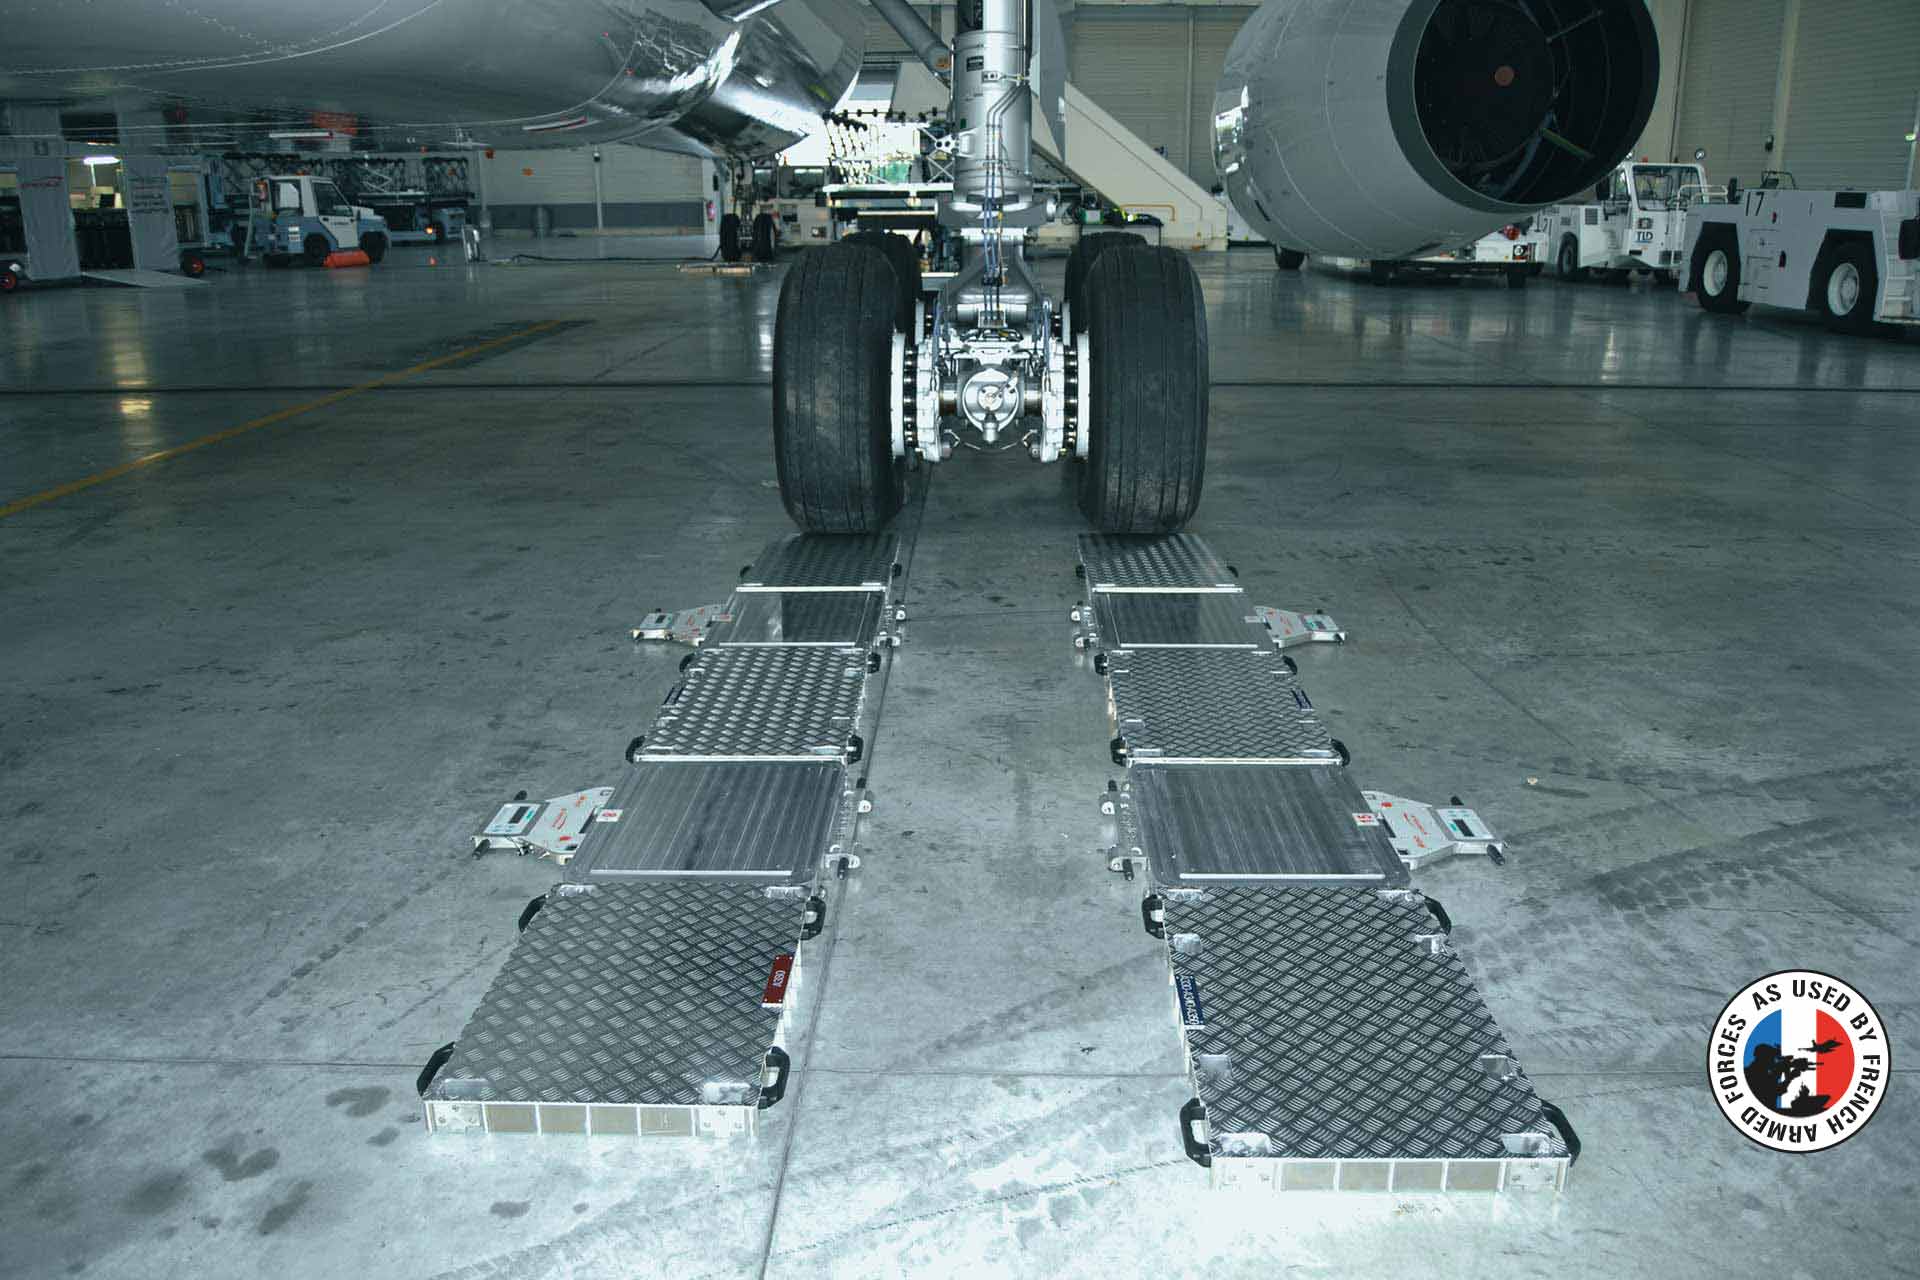 Weighing aircraft and helicopters